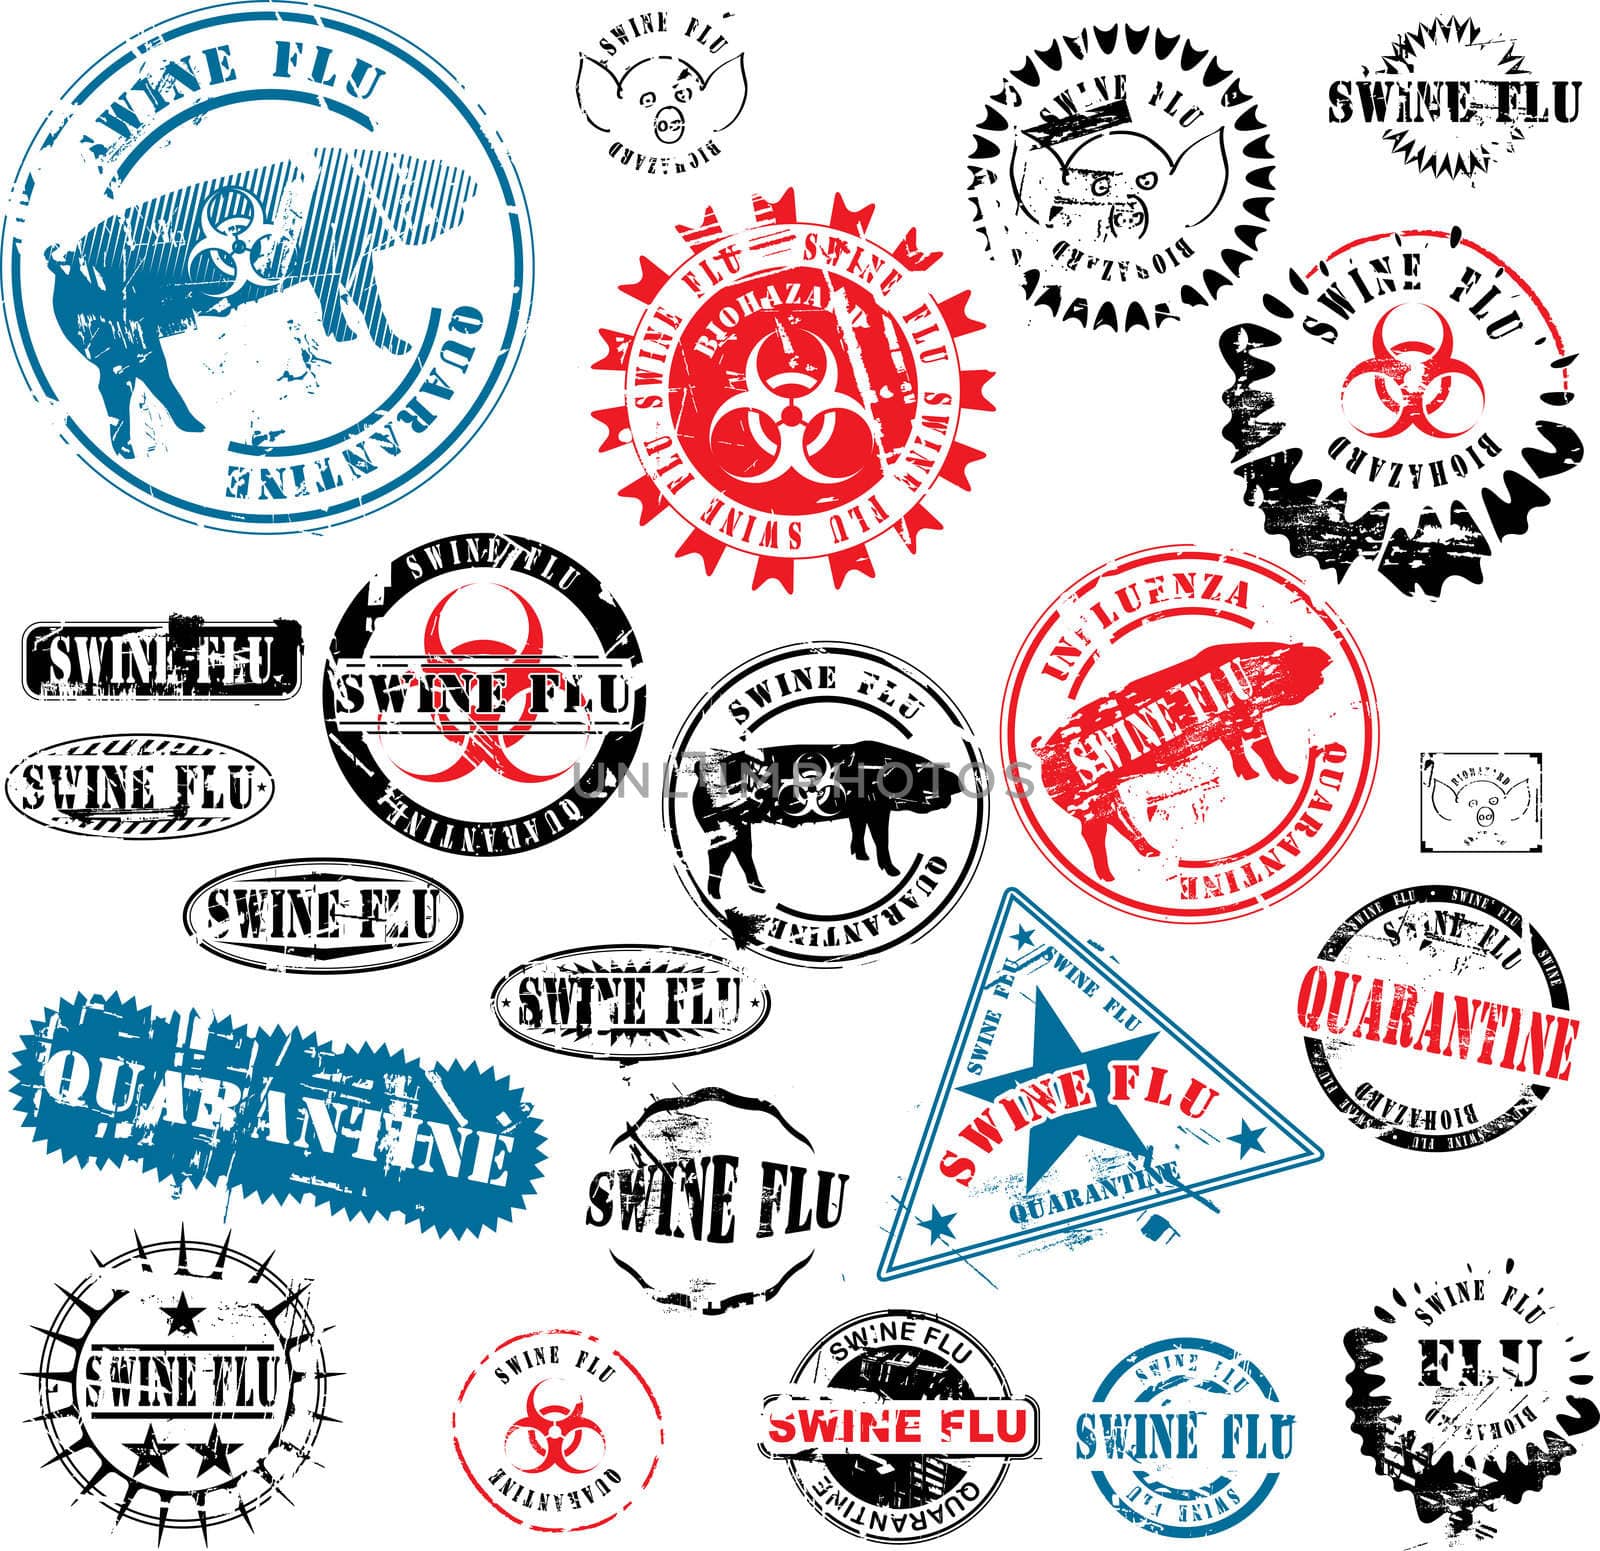 Collection of rubber stamps about swine flu. See other rubber stamp collections in my portfolio.